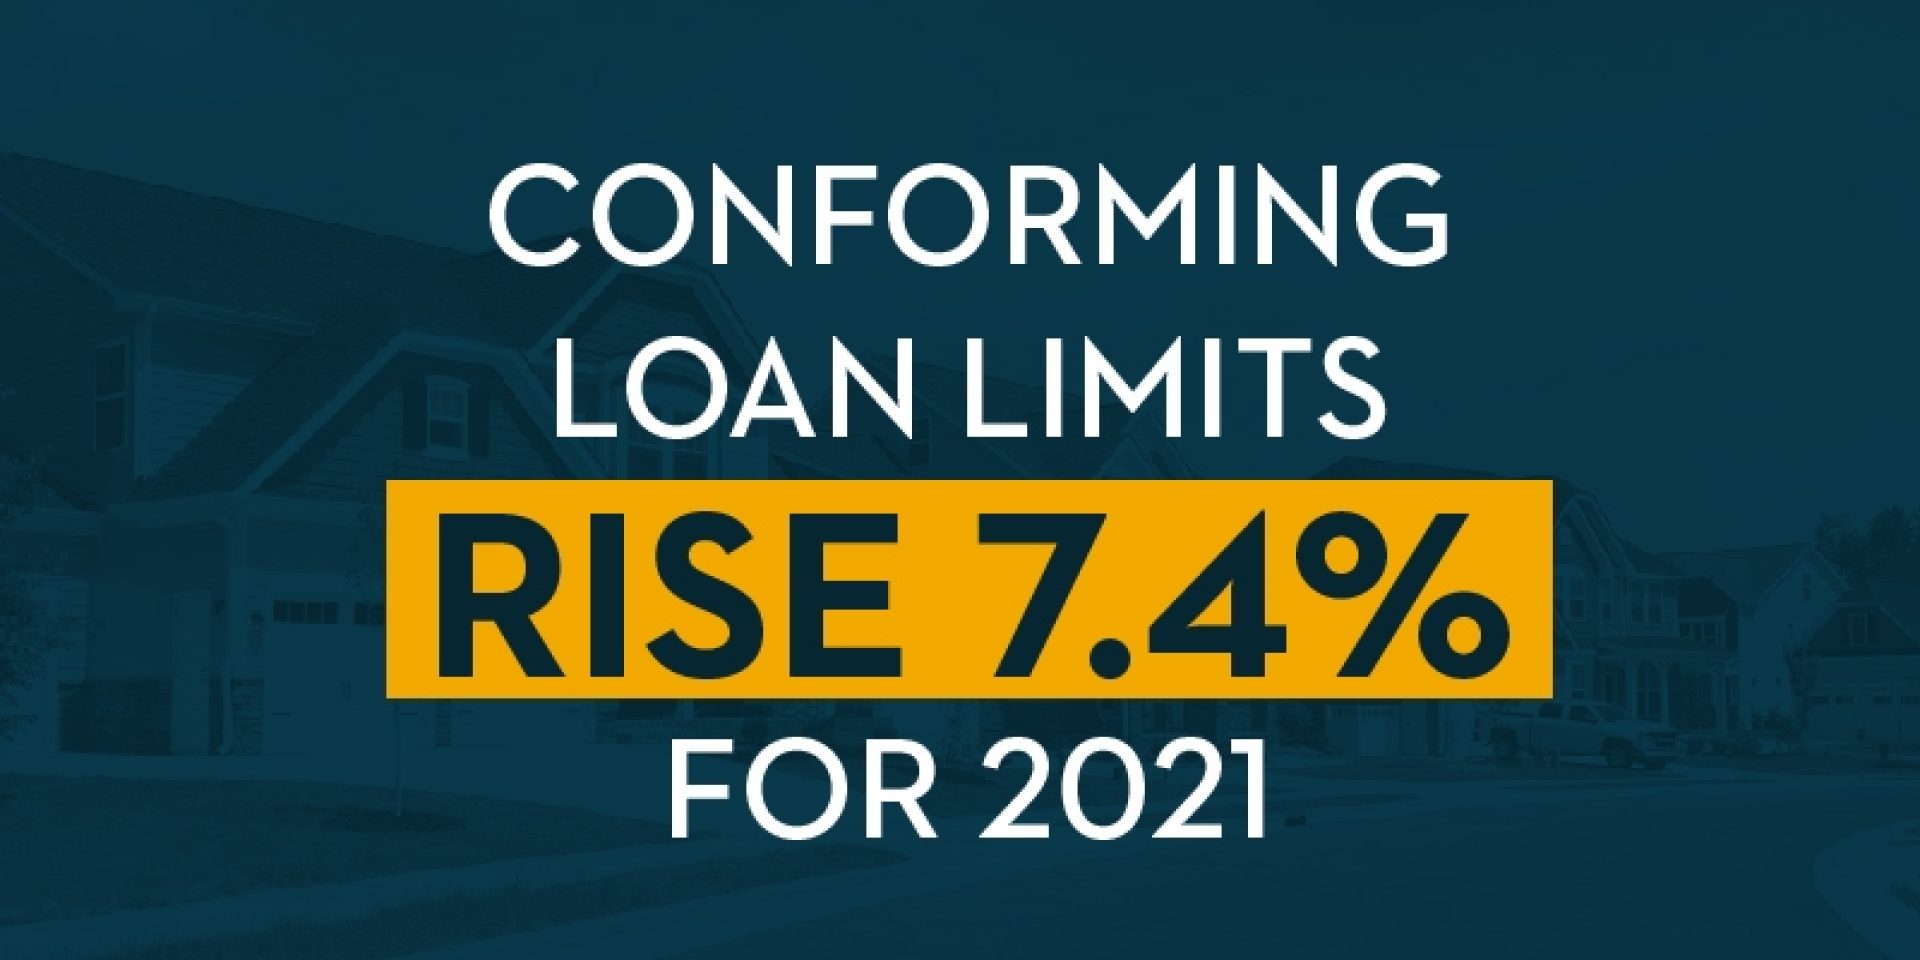 Conforming Loan Limits Rise 7.4 for 2021 The Servion Group